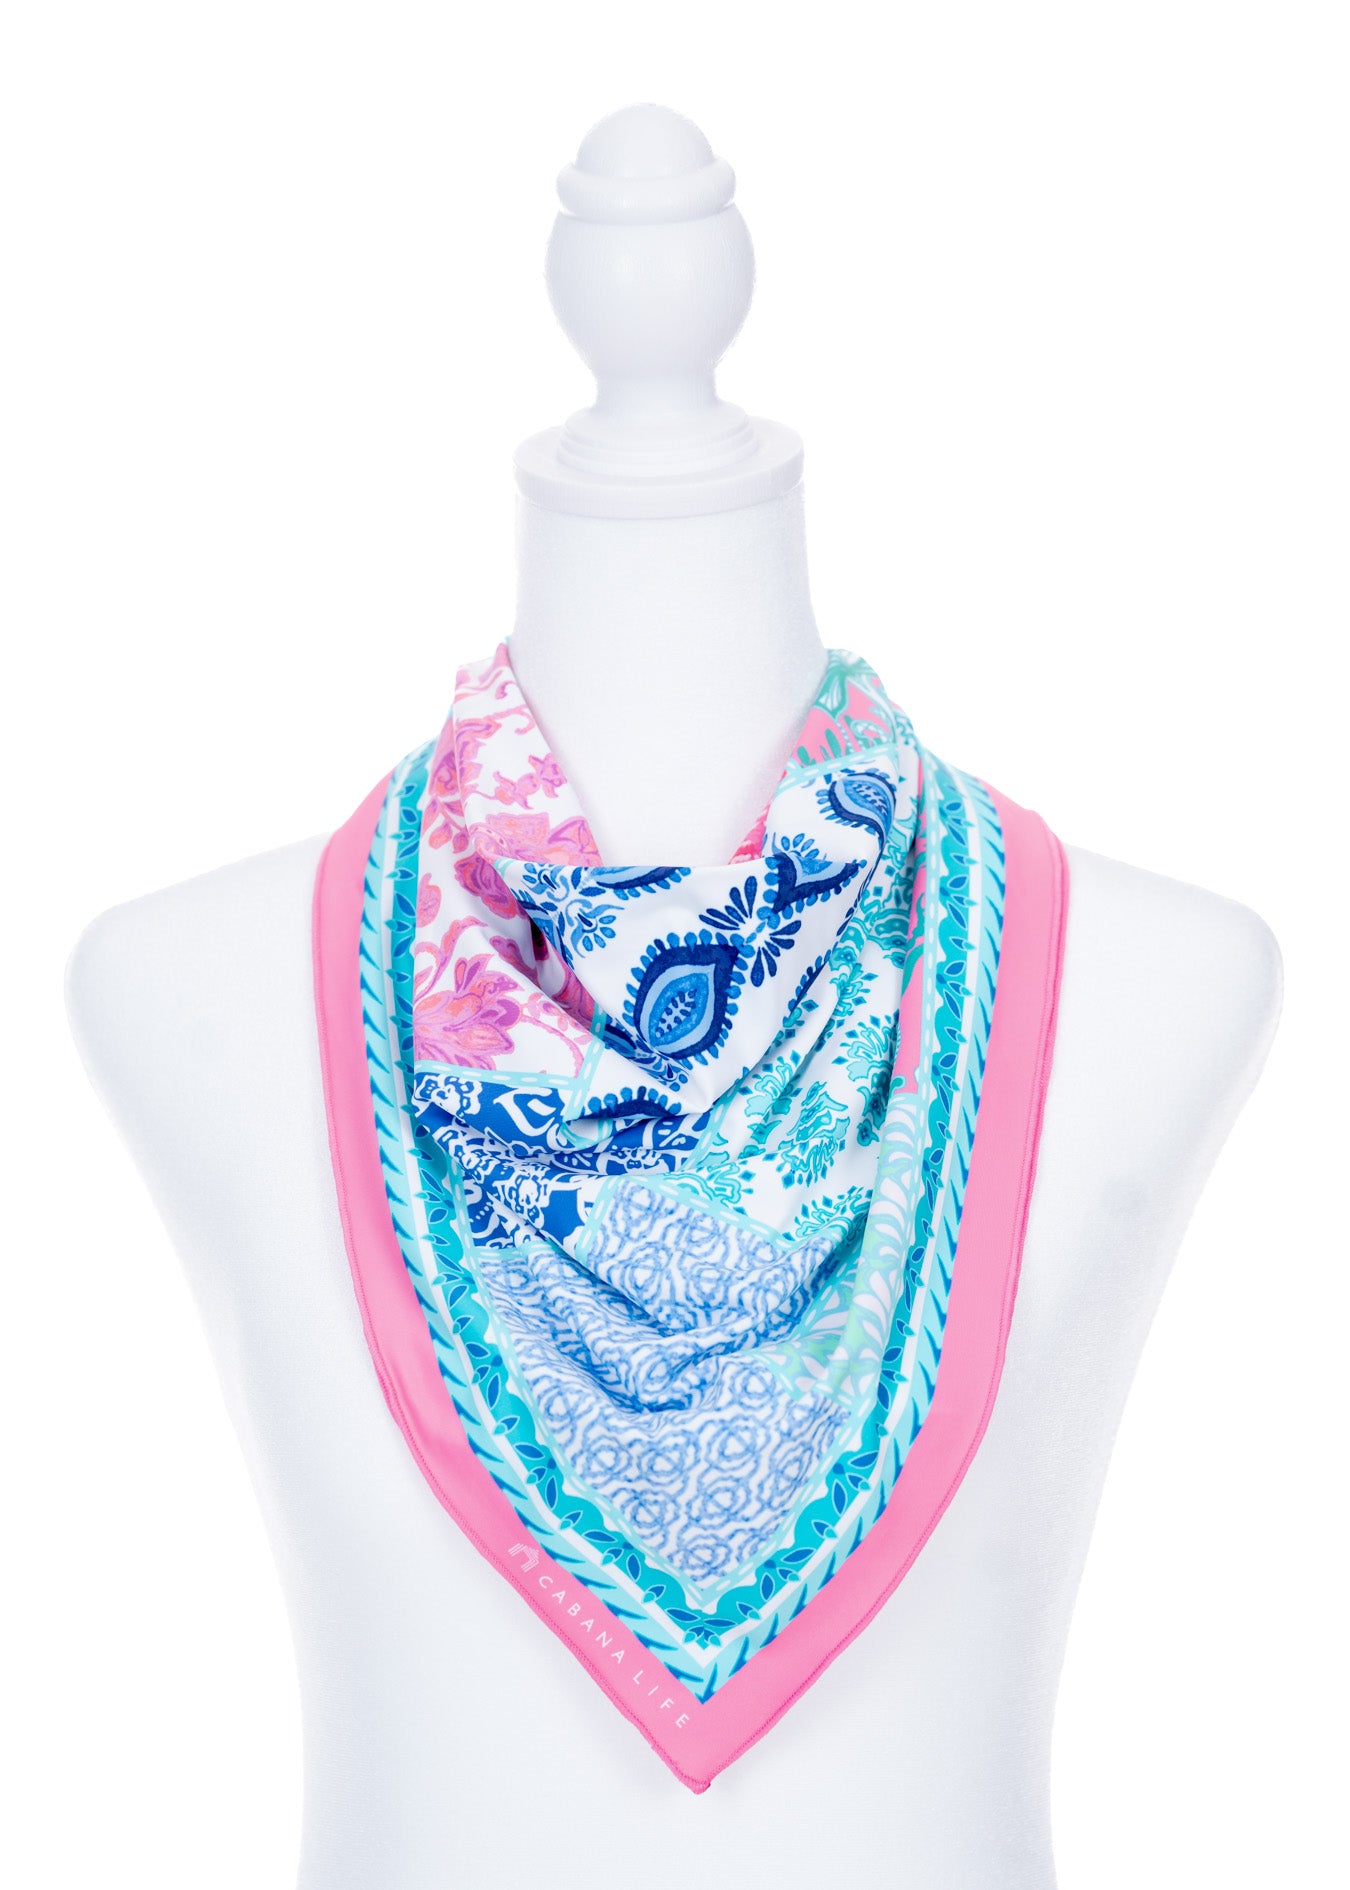 Printed Patchwork Scarf wrapped around neck of white mannequin